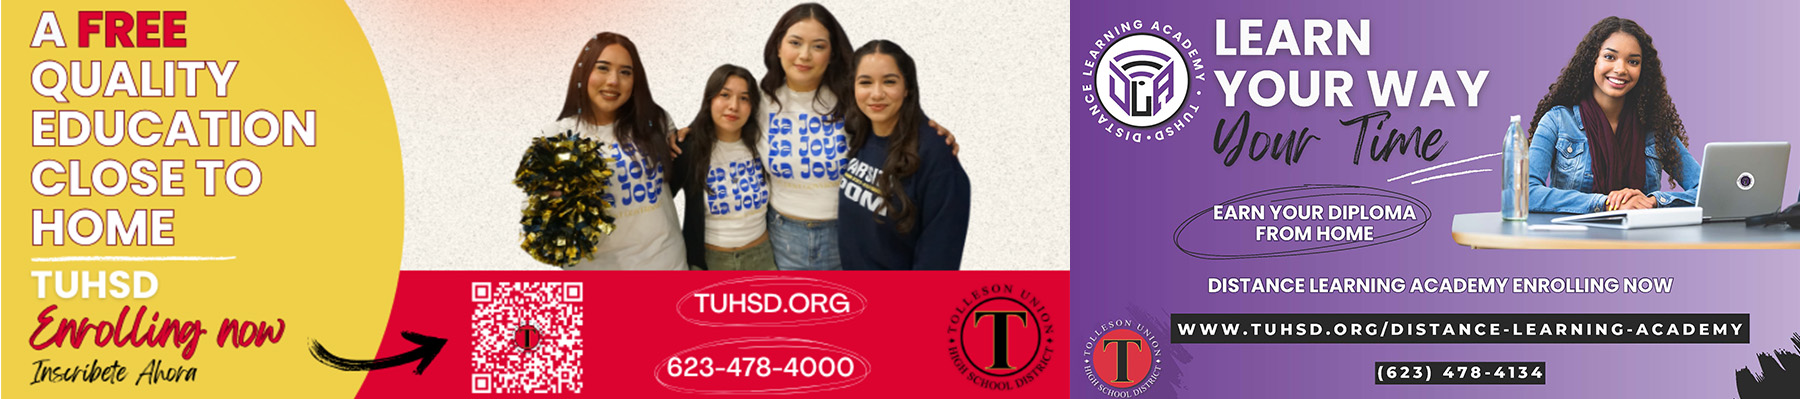 A free quality education close to home - TUHSD Enrolling now | Inscribete Ahora - tuhsd.org - 623-478-4000 | Learn your way, your time-Earn your diploma from home-distance learning academy enrolling now-623-478-4134